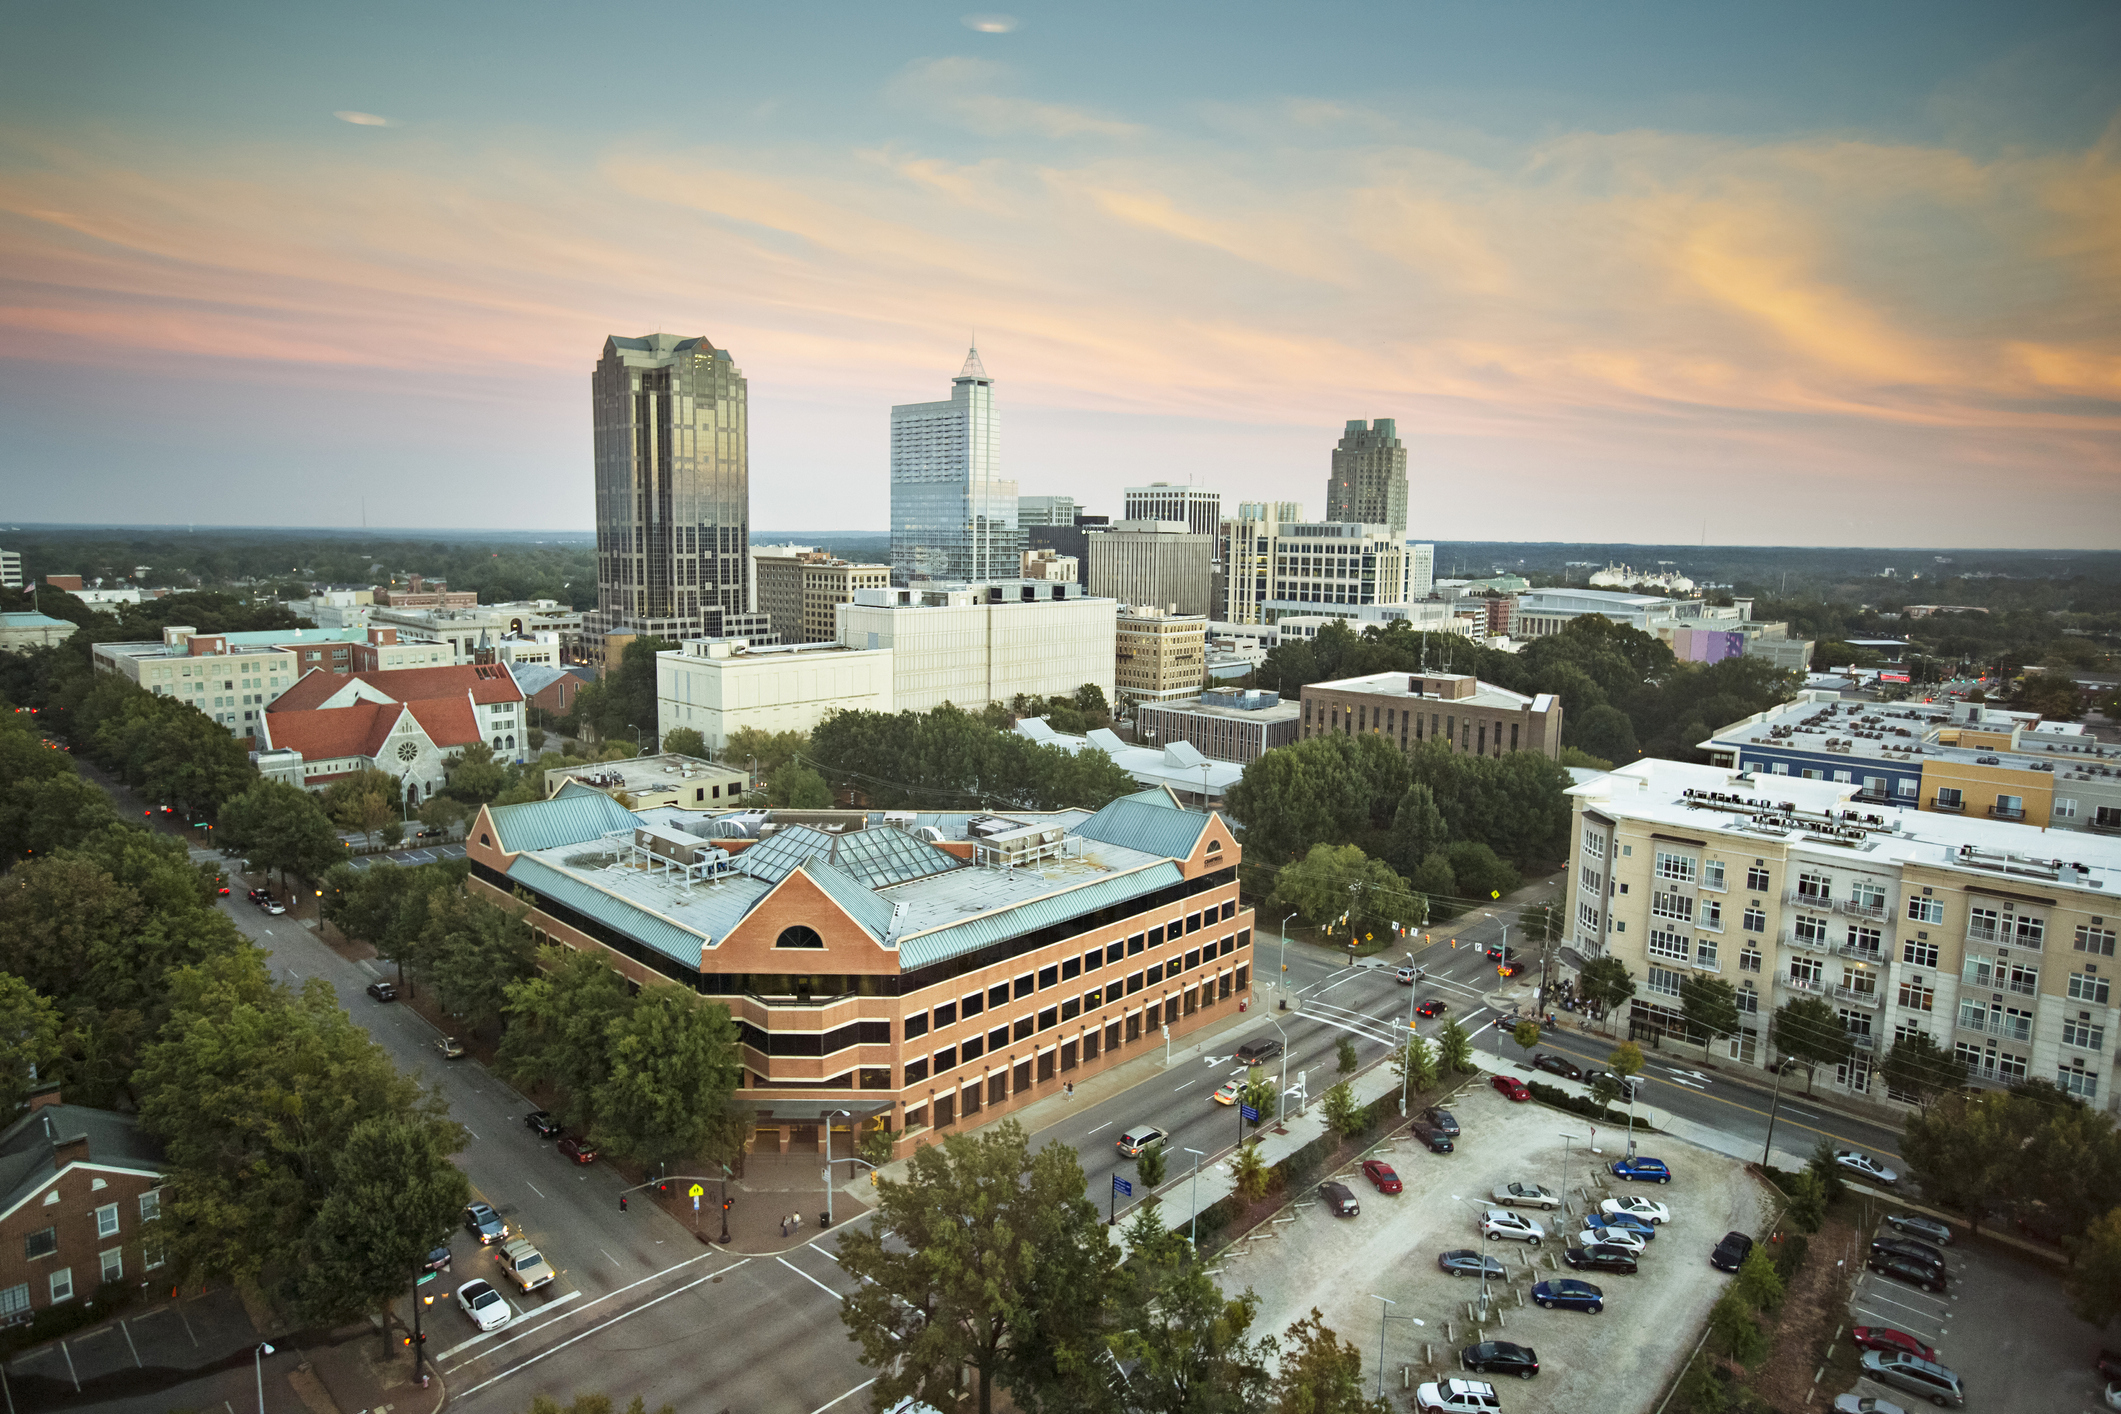 View from downtown Raleigh, North Carolina at dusk.